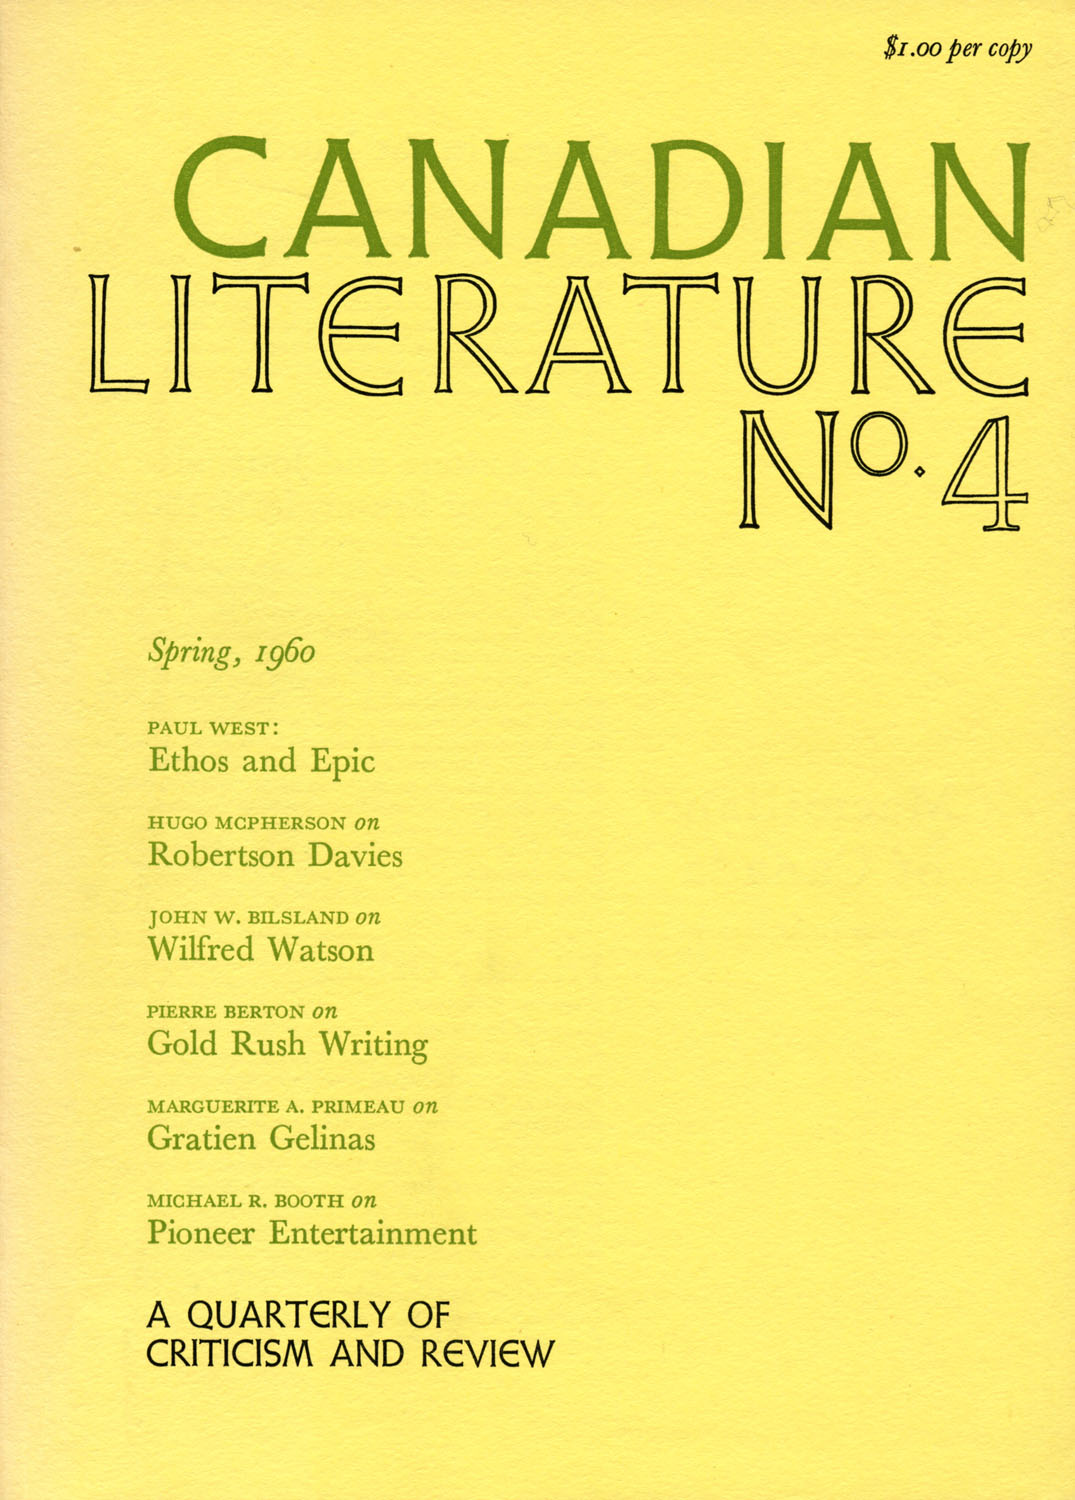 					View No. 4 (1960): Canadian Literature
				